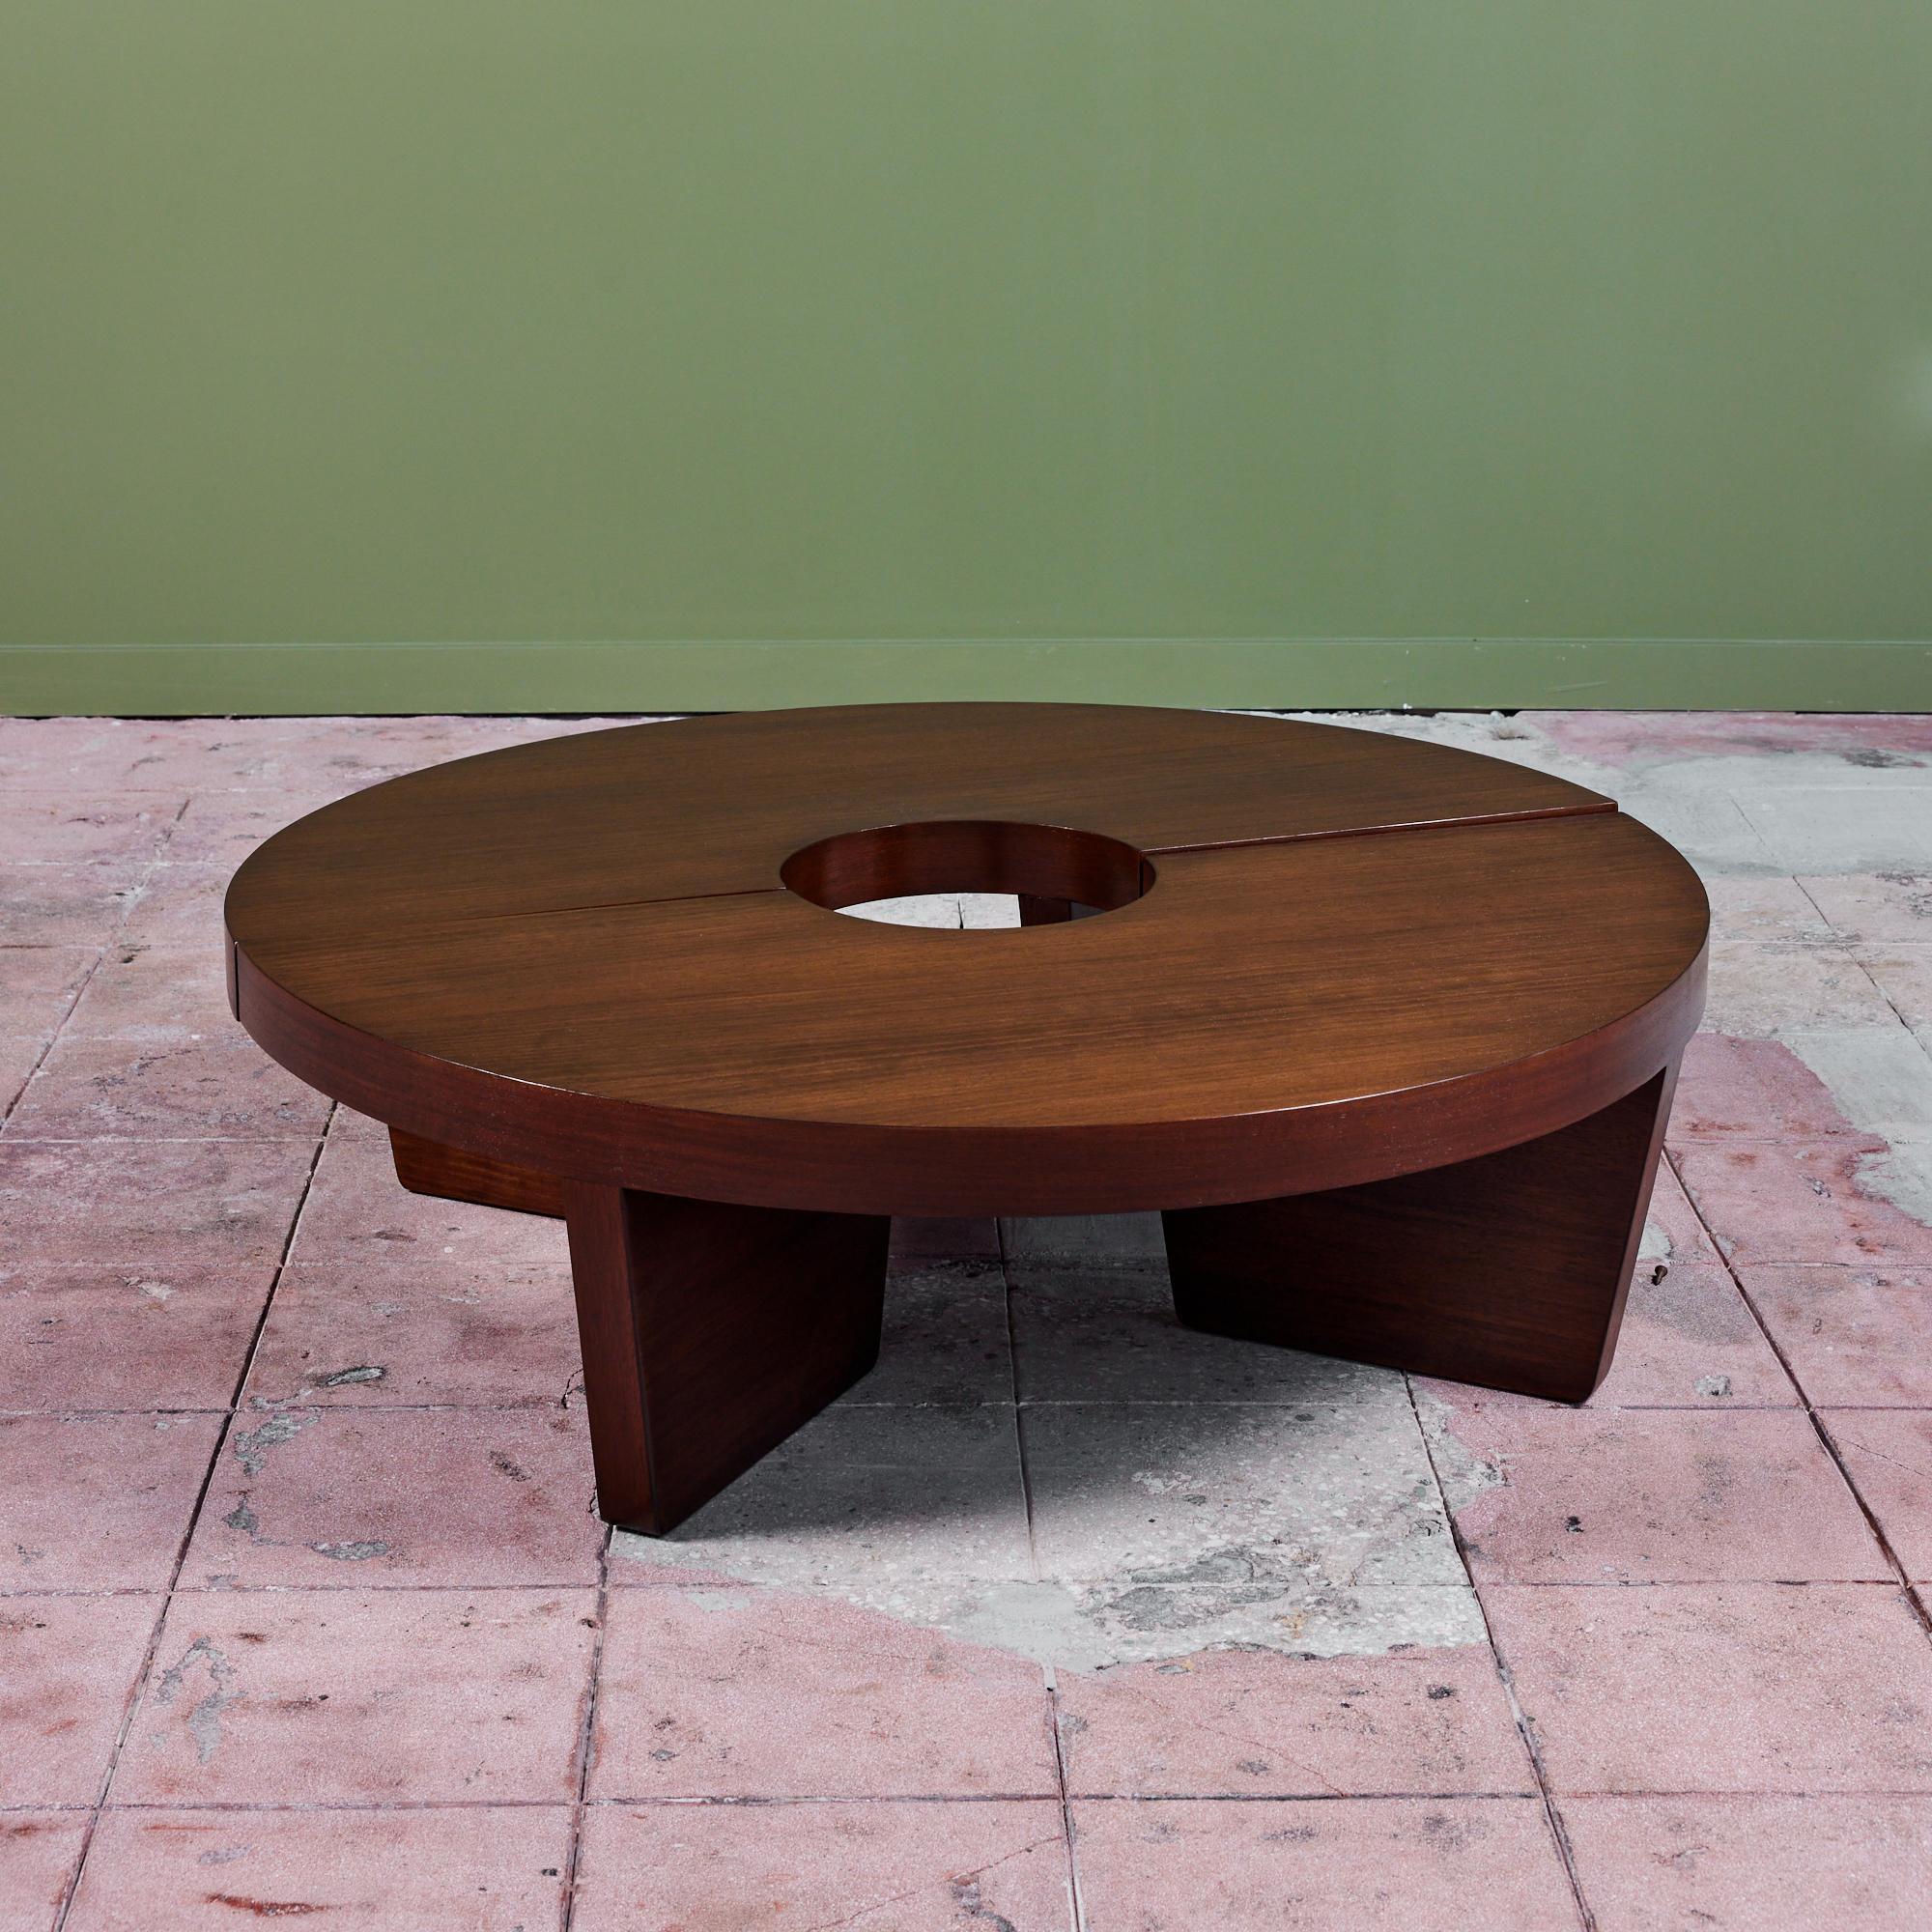 Mahogany coffee table by Harvey Probber, c.1949, USA. This self taught designers table features two semi circle table tops that can connect together to form a circle or be placed like an 